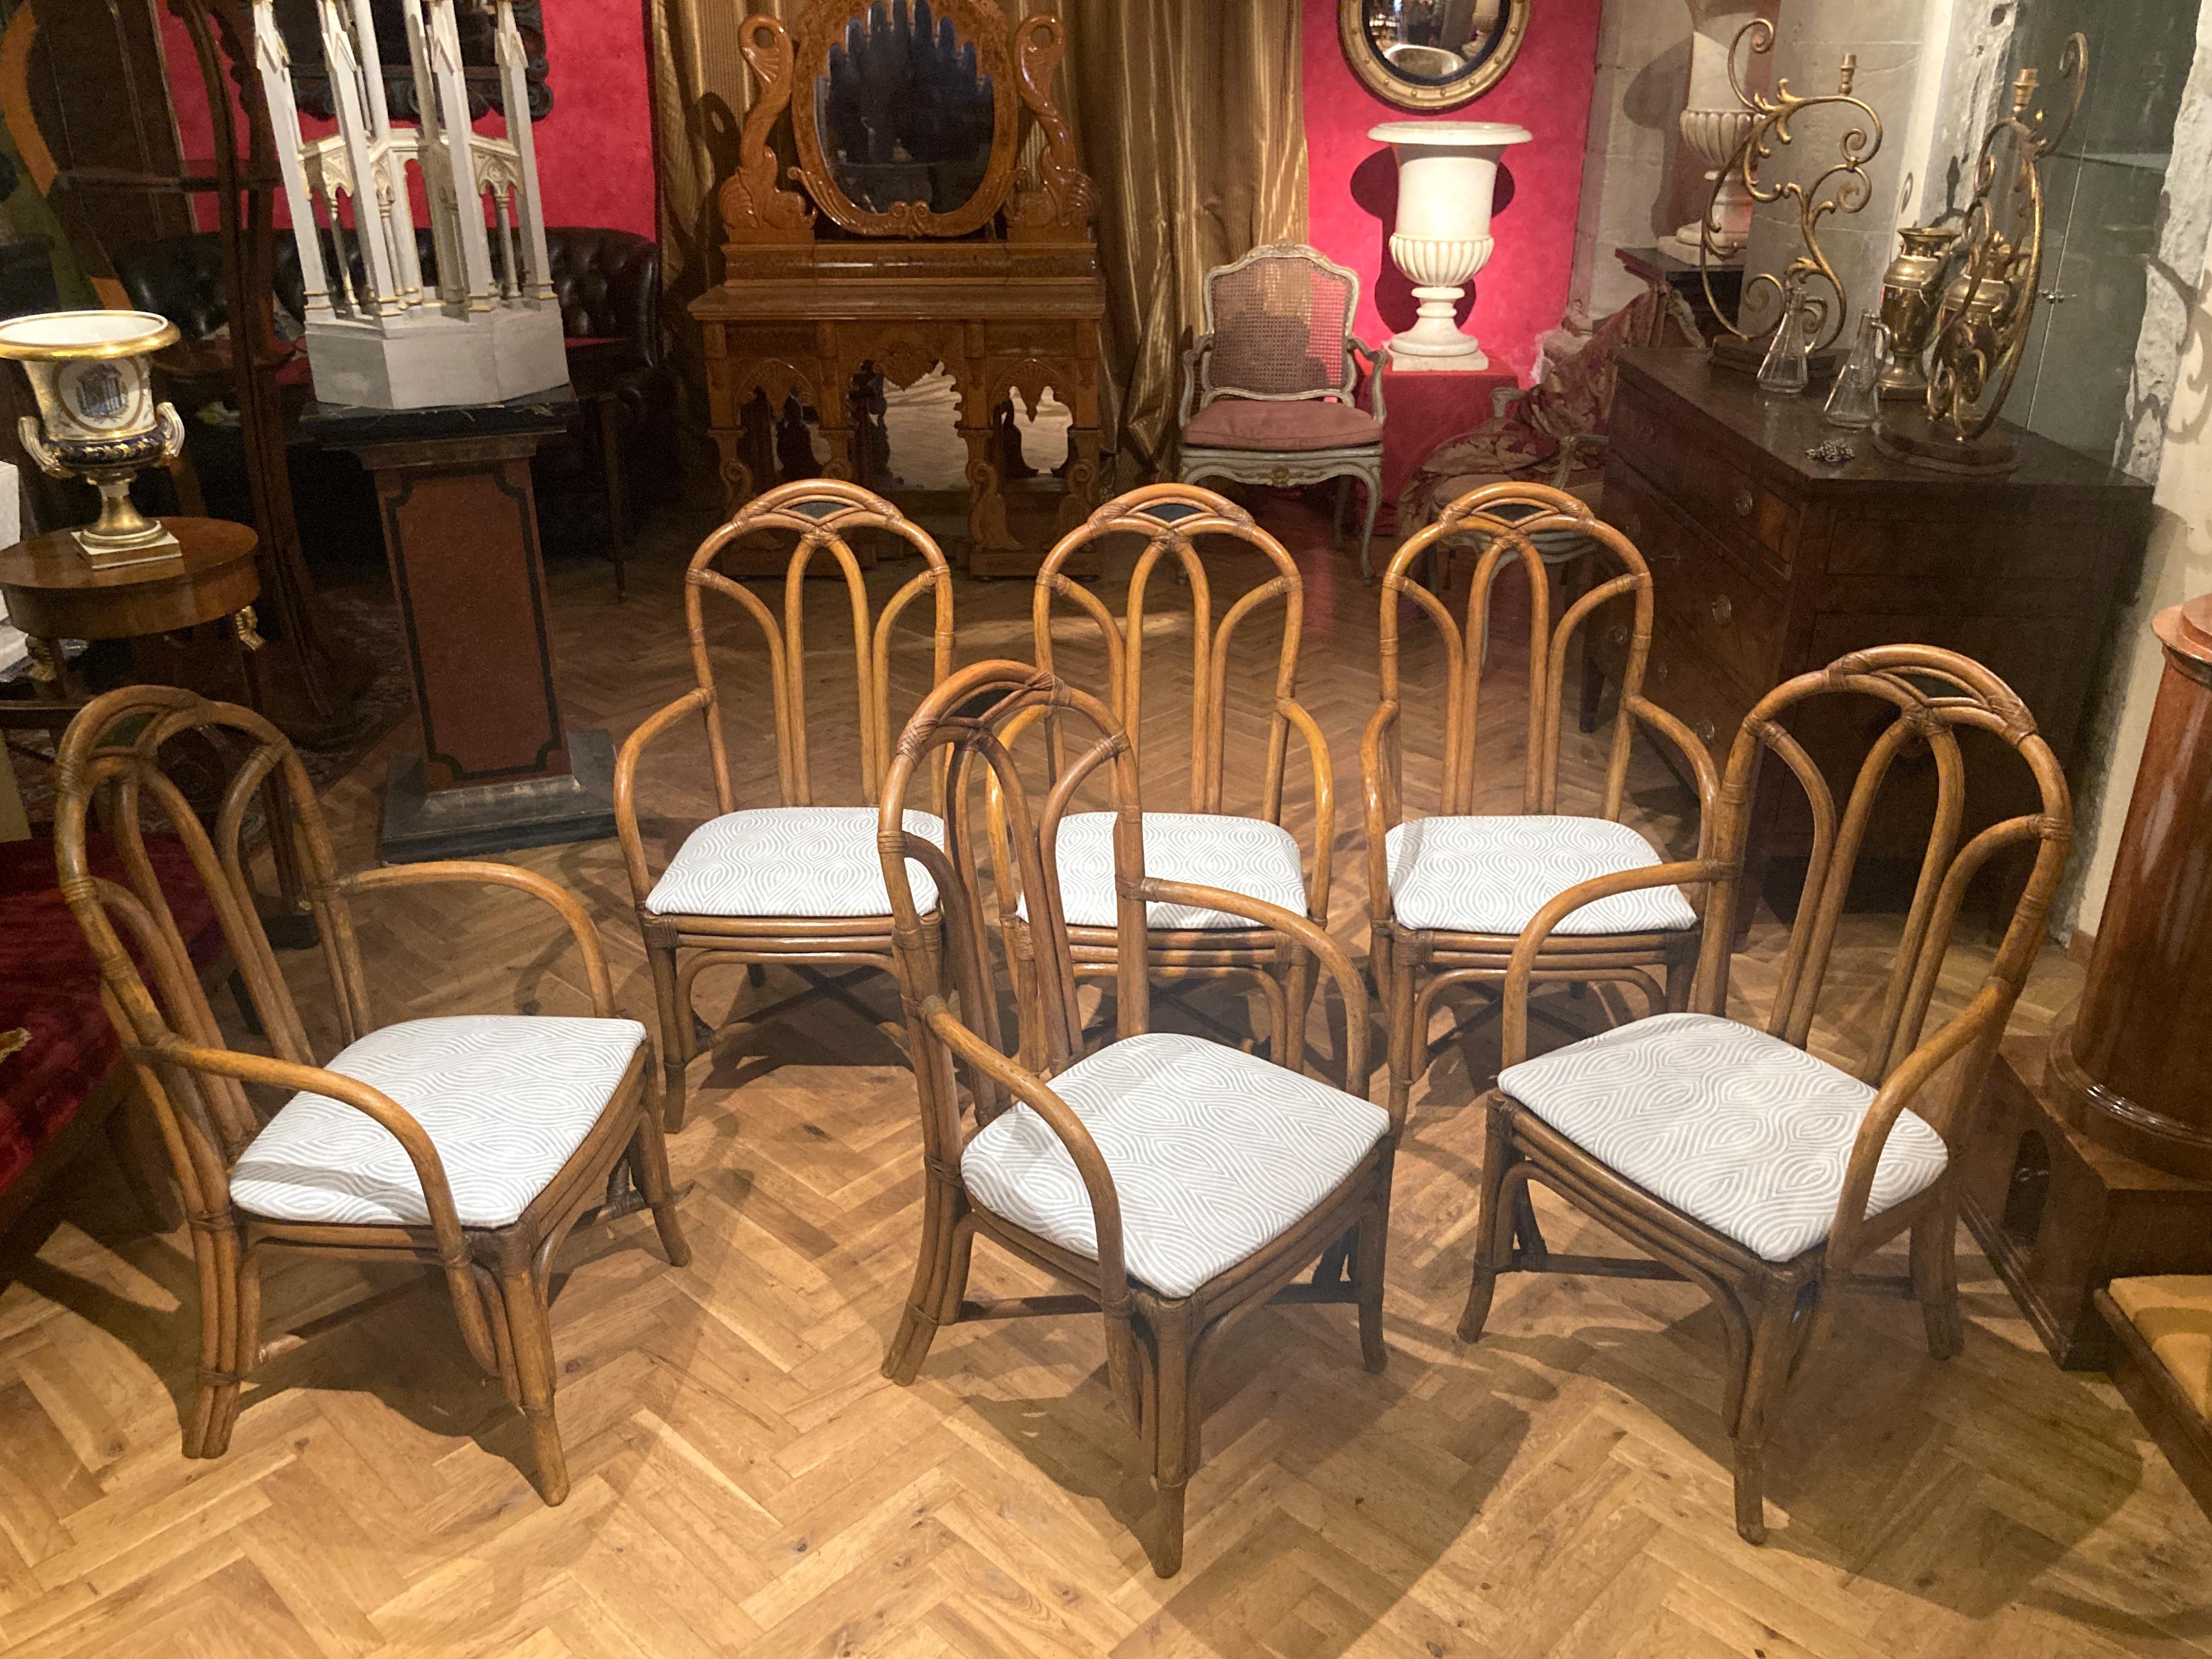 These six Italian Mid-Century Modern bamboo armchairs are a rare vintage set featuring great sculptural shape with a very nice intricate pattern and woven leather joints along with a gorgeous white and blue cotton upholstery.
Extremely well made